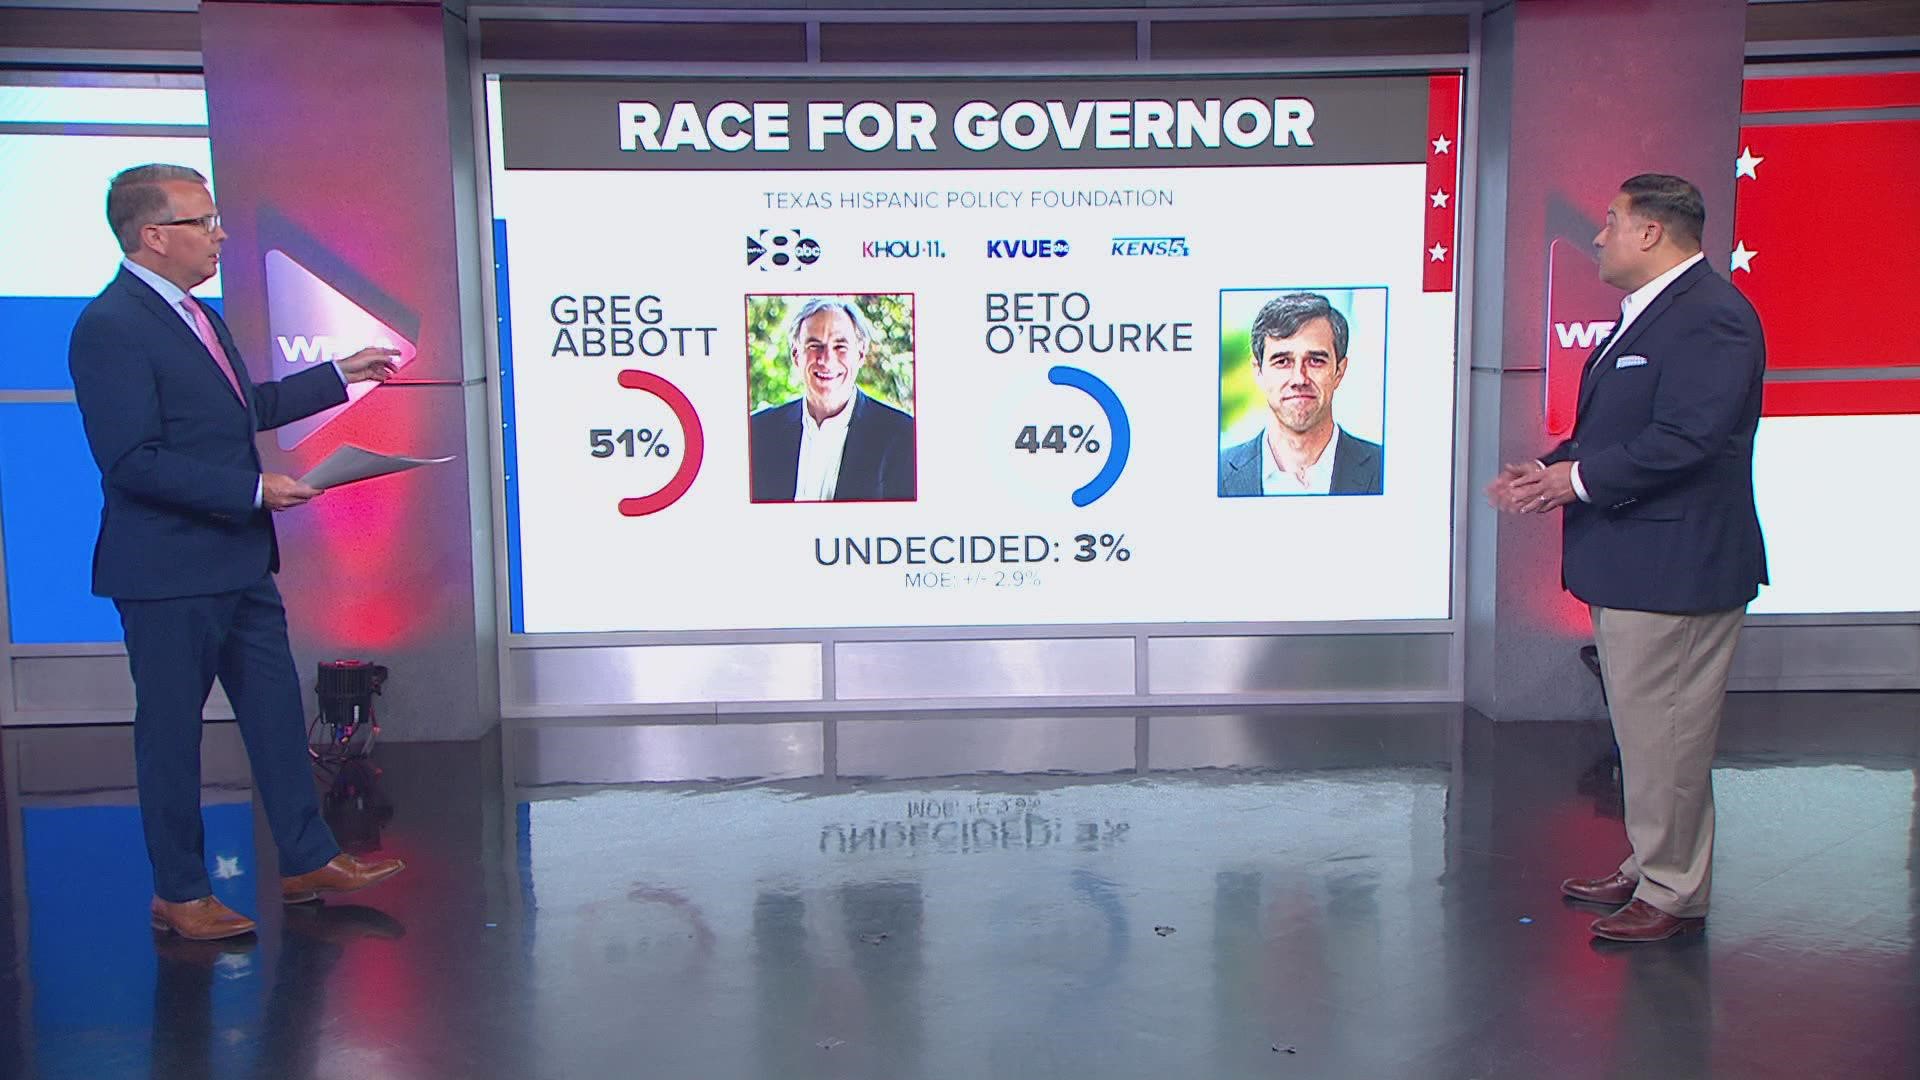 The poll found that Republican incumbent Greg Abbott leads Democrat Beto O’Rourke by seven points (51% to 44%) among likely voters.